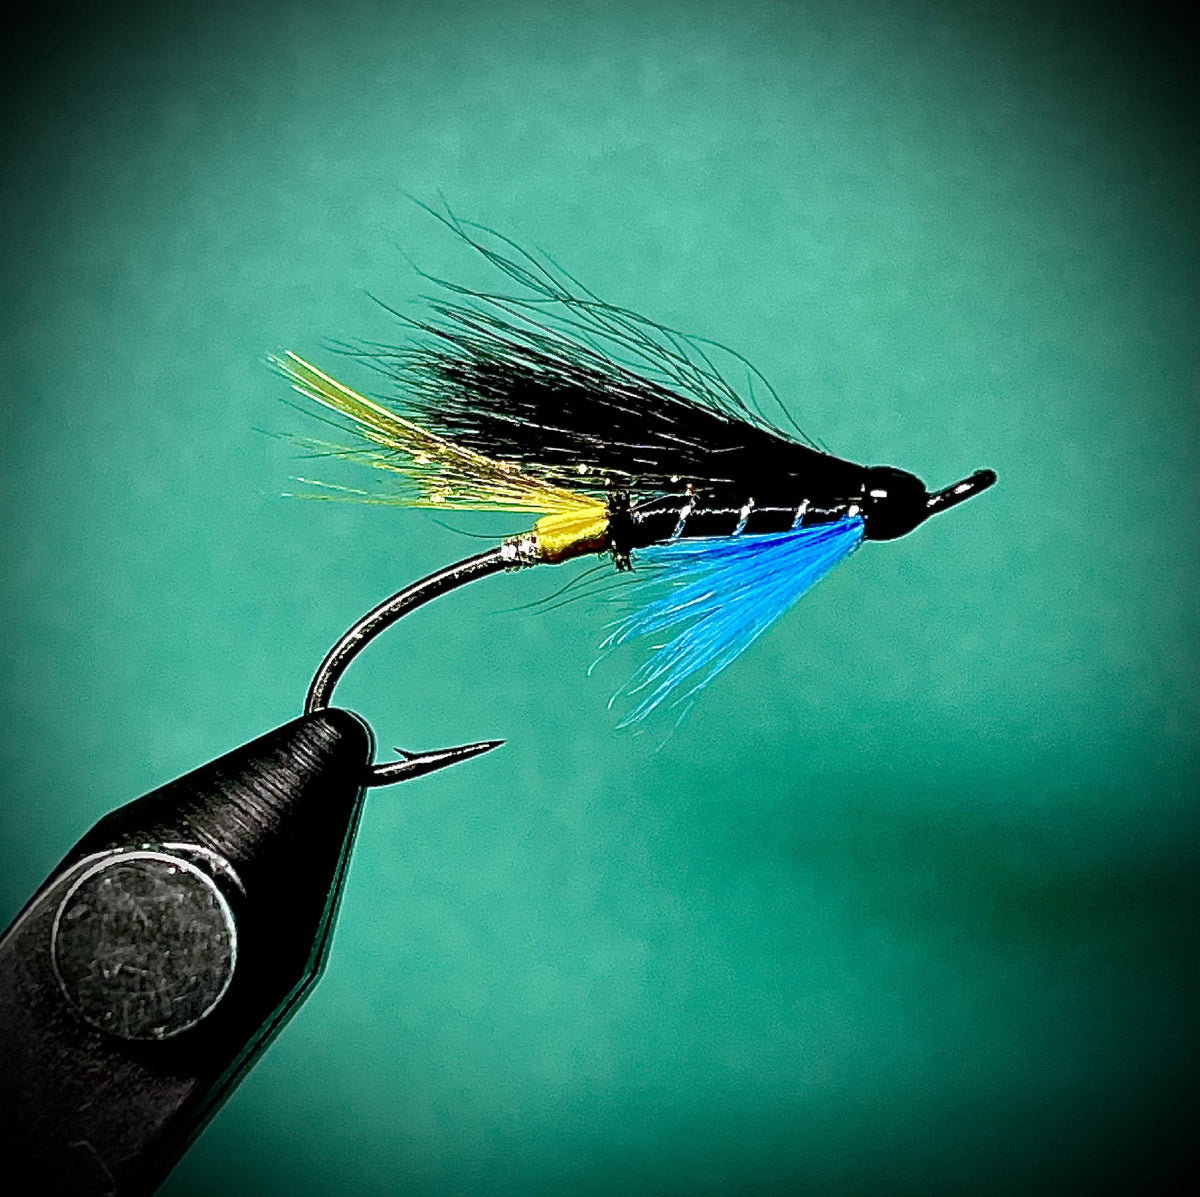 Blue charm – Check Your Flies